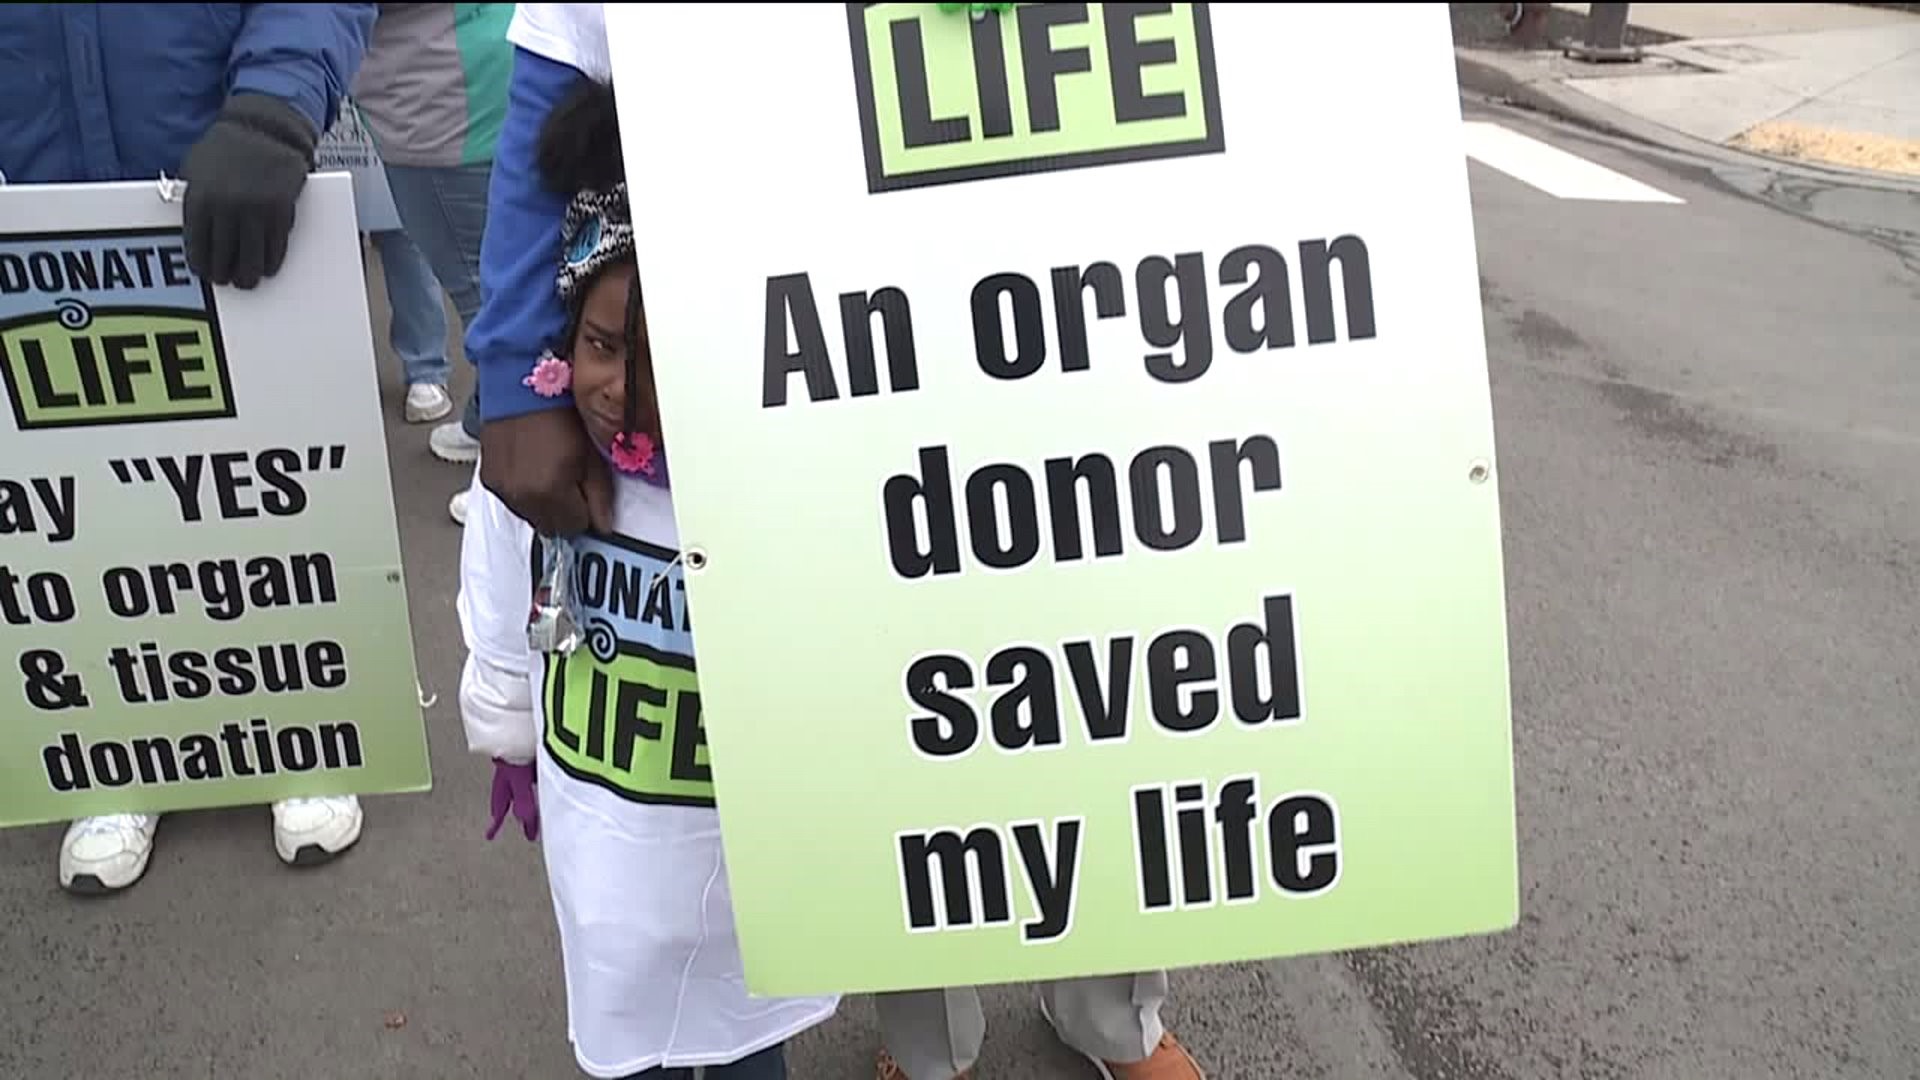 Celebrating the Gift of Life in This Year's St. Patrick's Parade